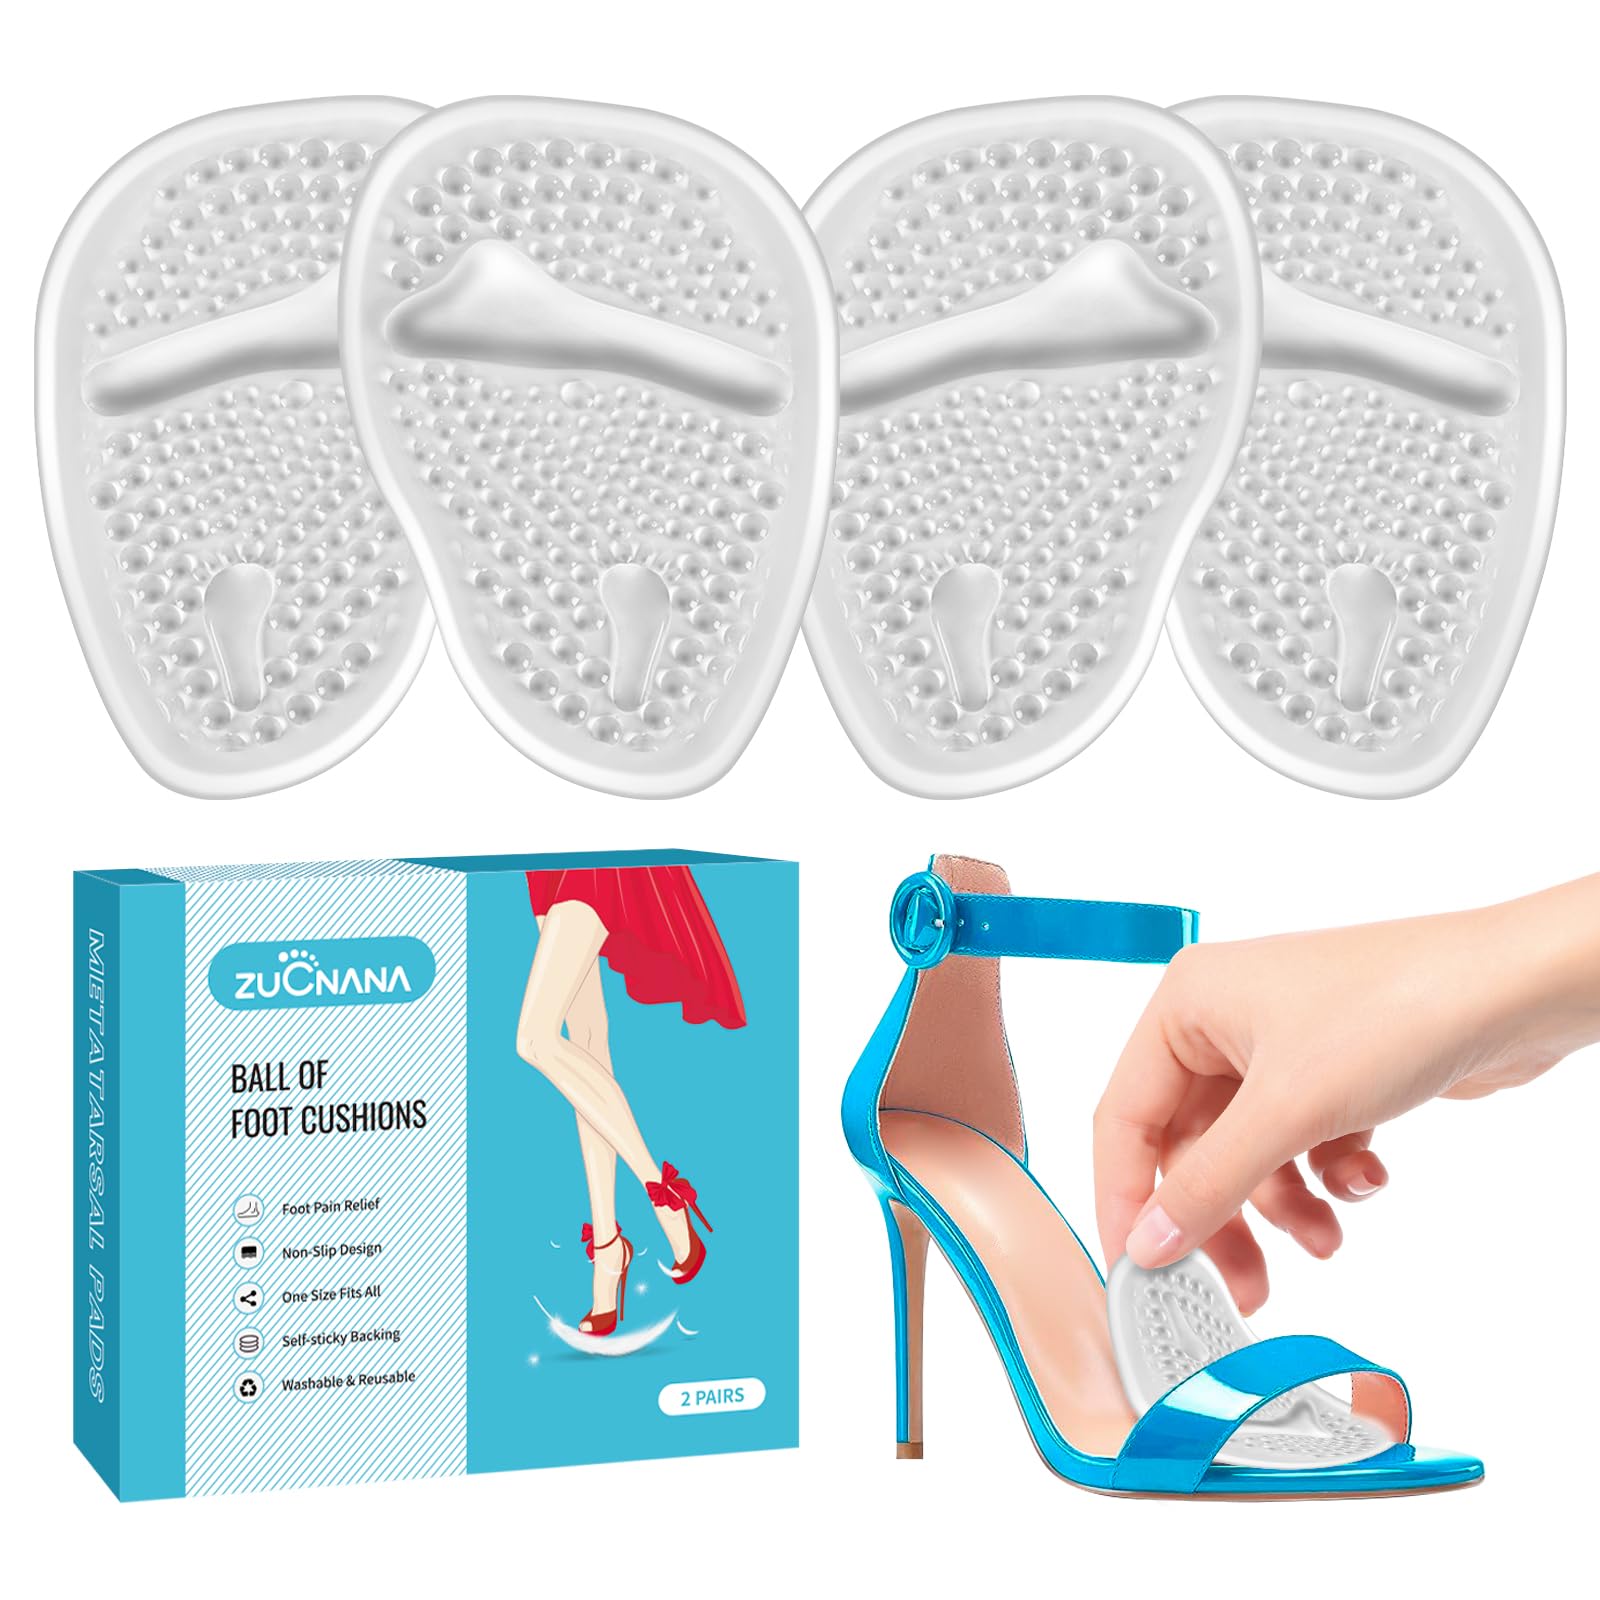 ZUCNANA Metatarsal Pads (2 Pairs Gel Shoe Inserts Women) | Heel Inserts for Women | Ball of Foot Cushions for Heels Foot Pain Relief and